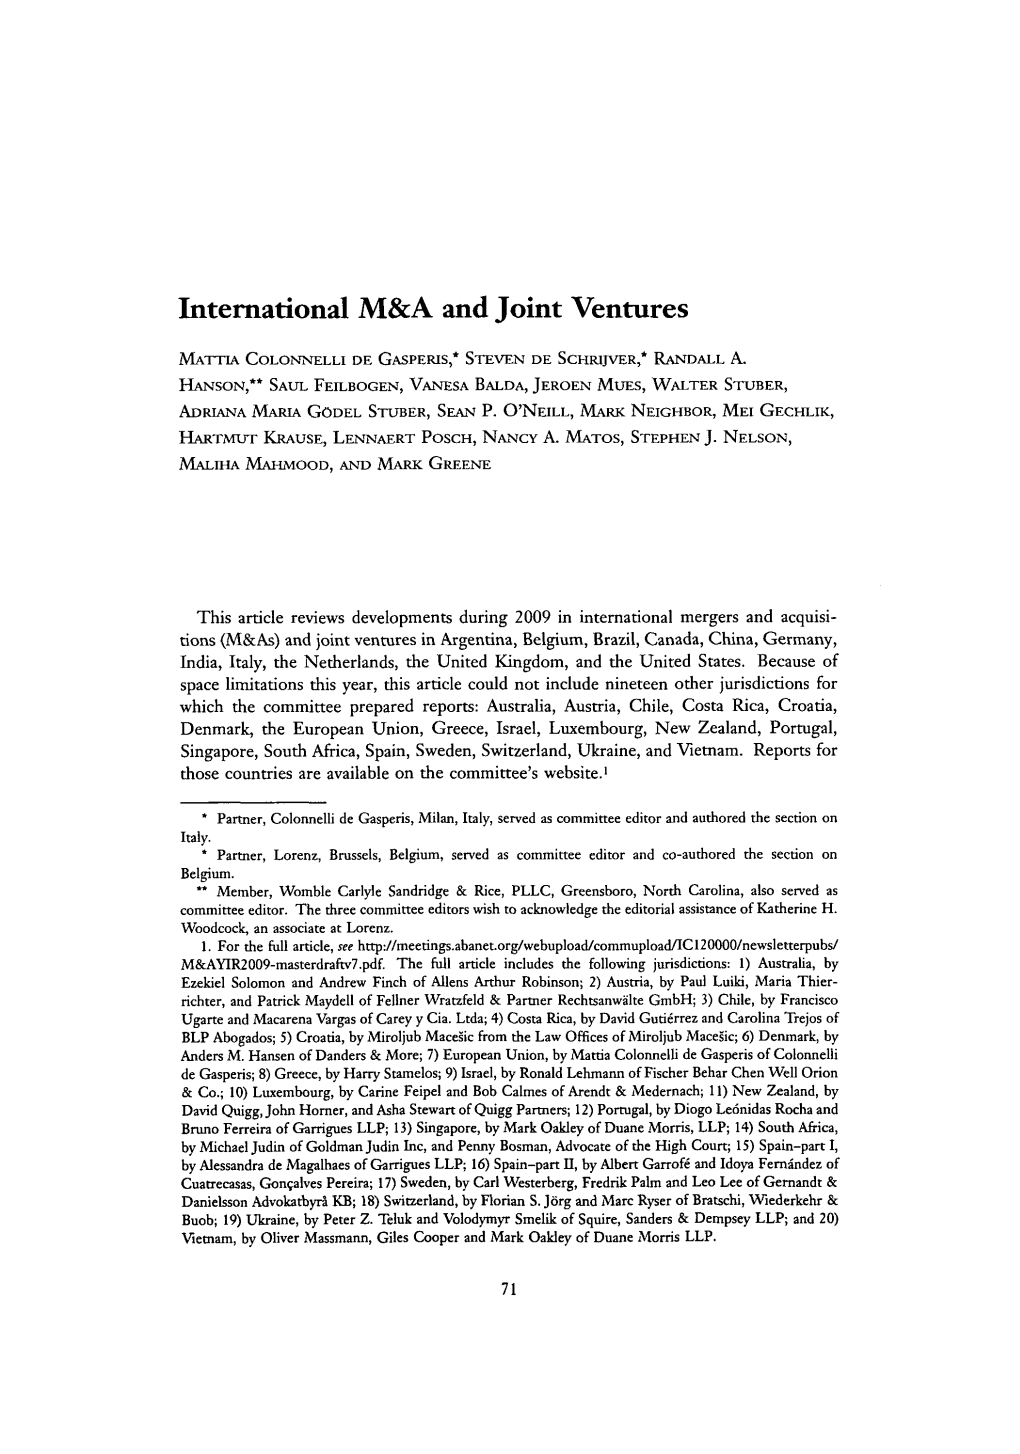 International M&A and Joint Ventures